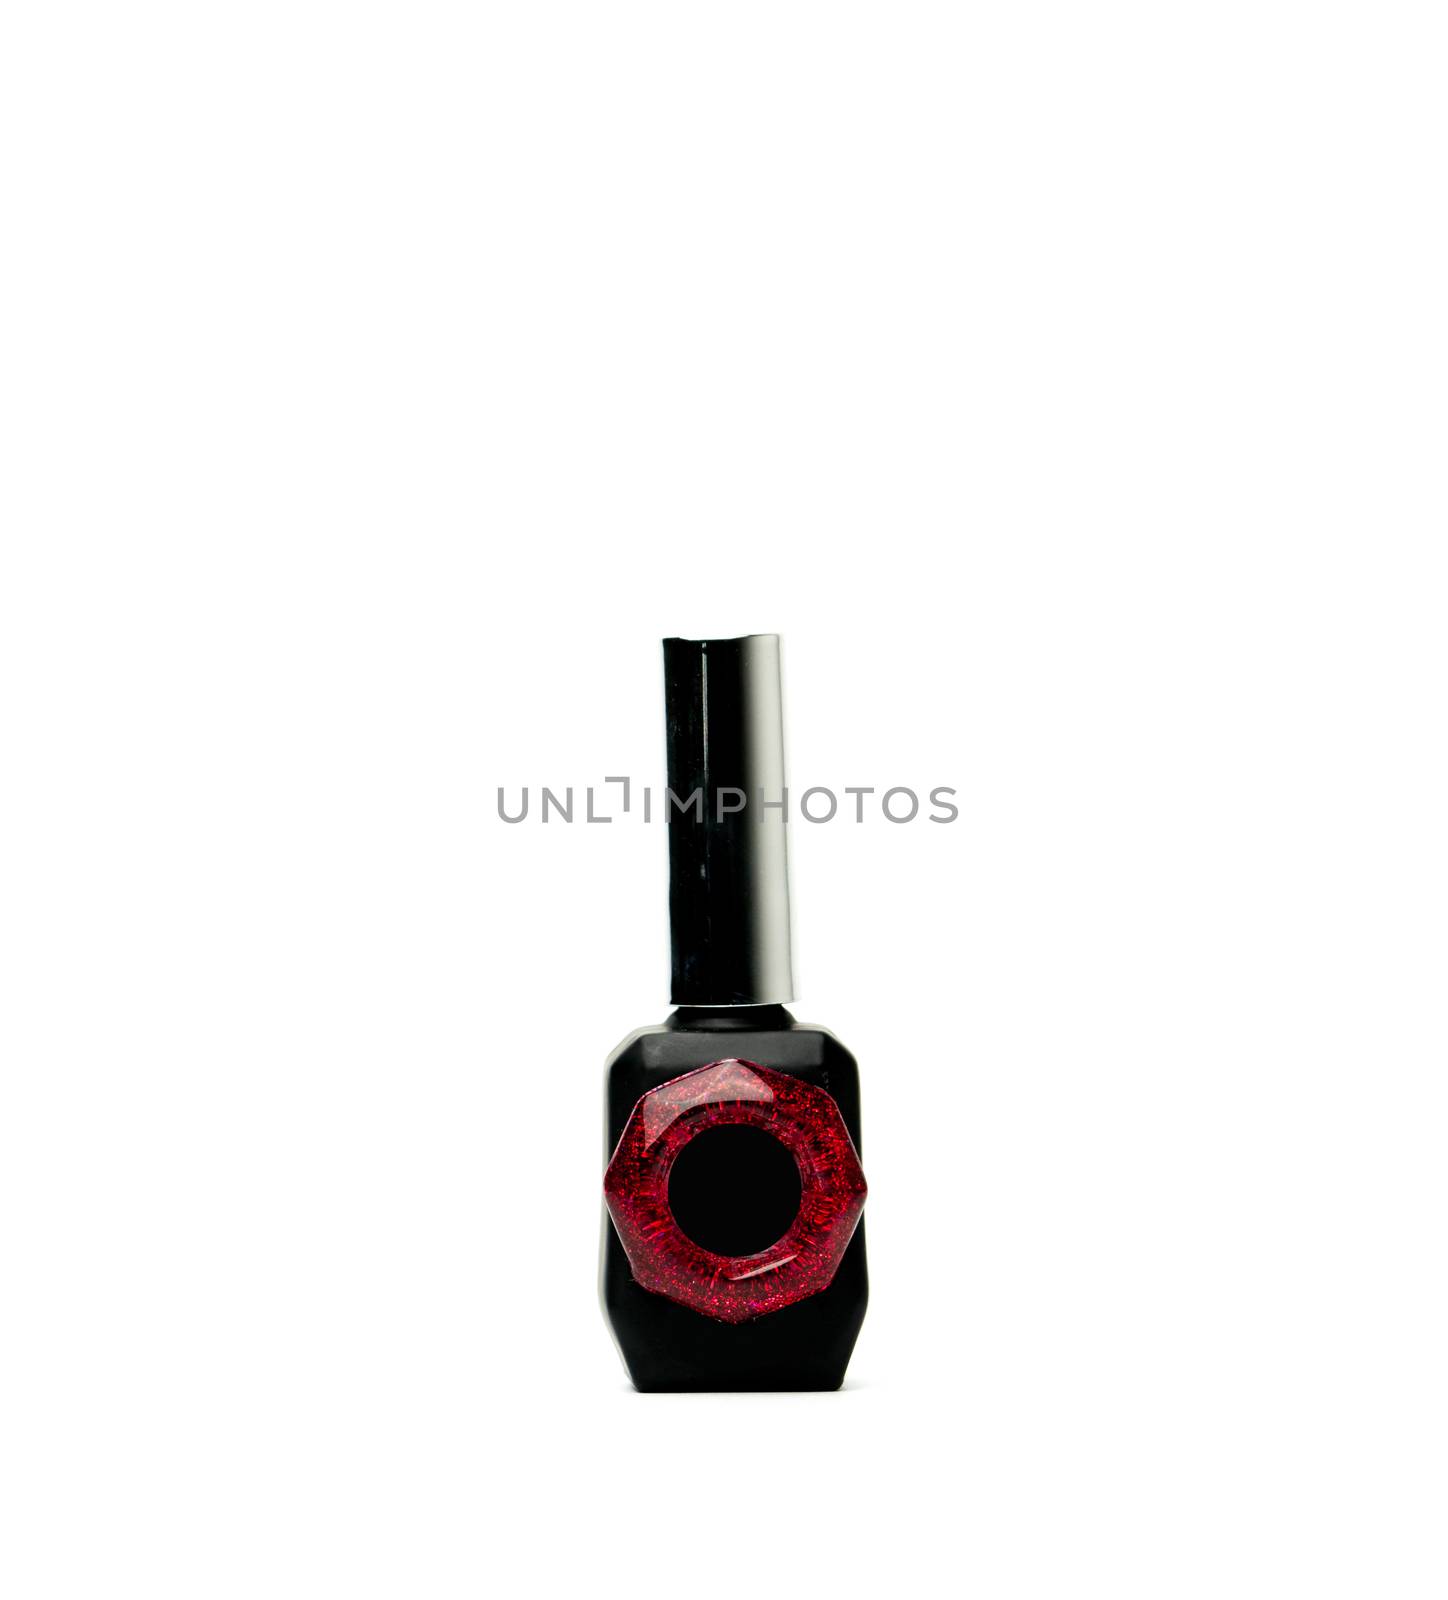 Unique nail polish bottle isolated on white background with copy space and blank label, just add your own text